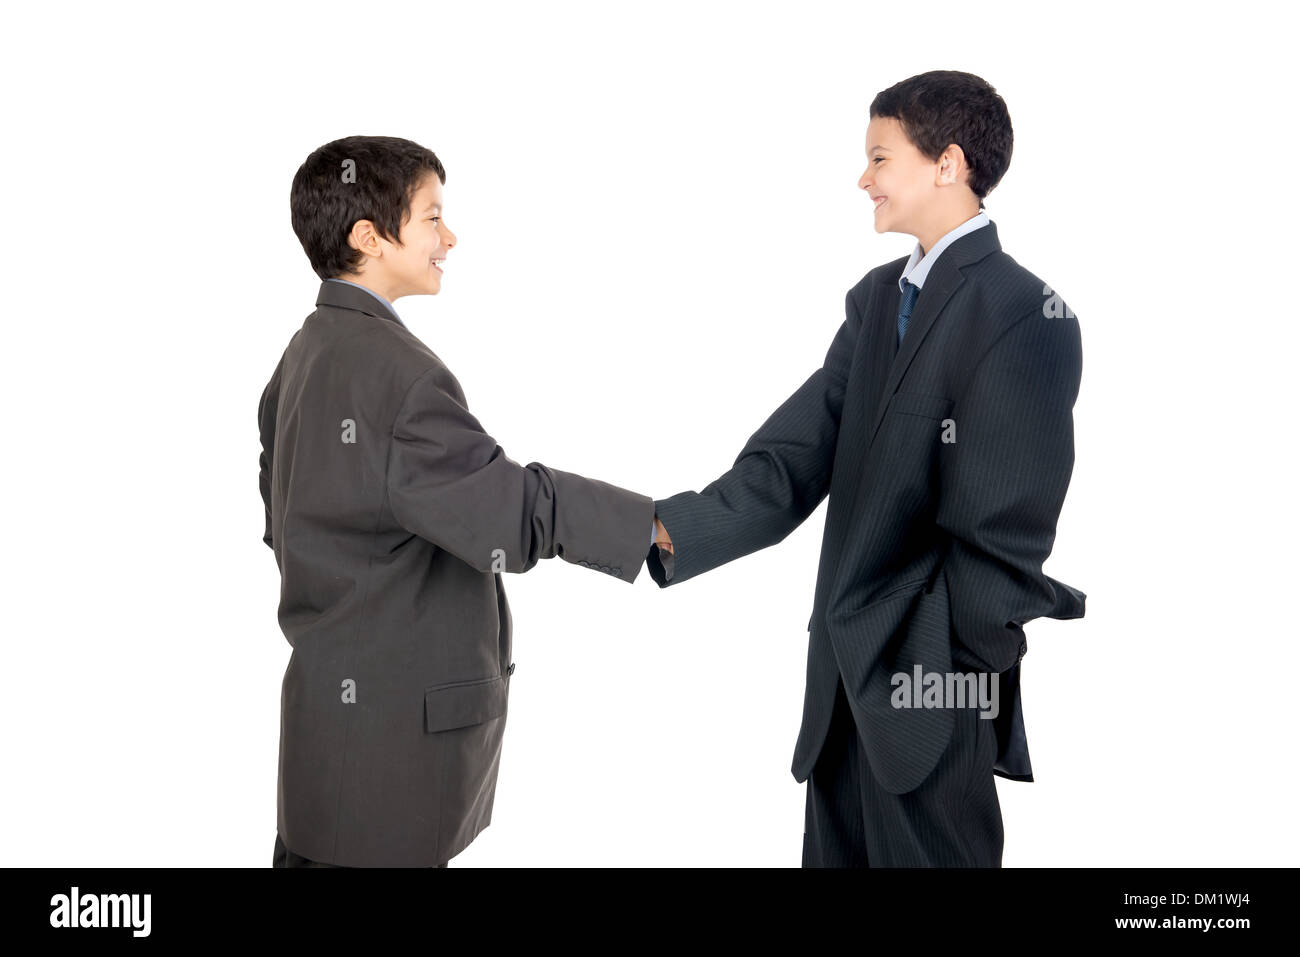 Young boys dressed with a big man's suit shaking hands Stock Photo